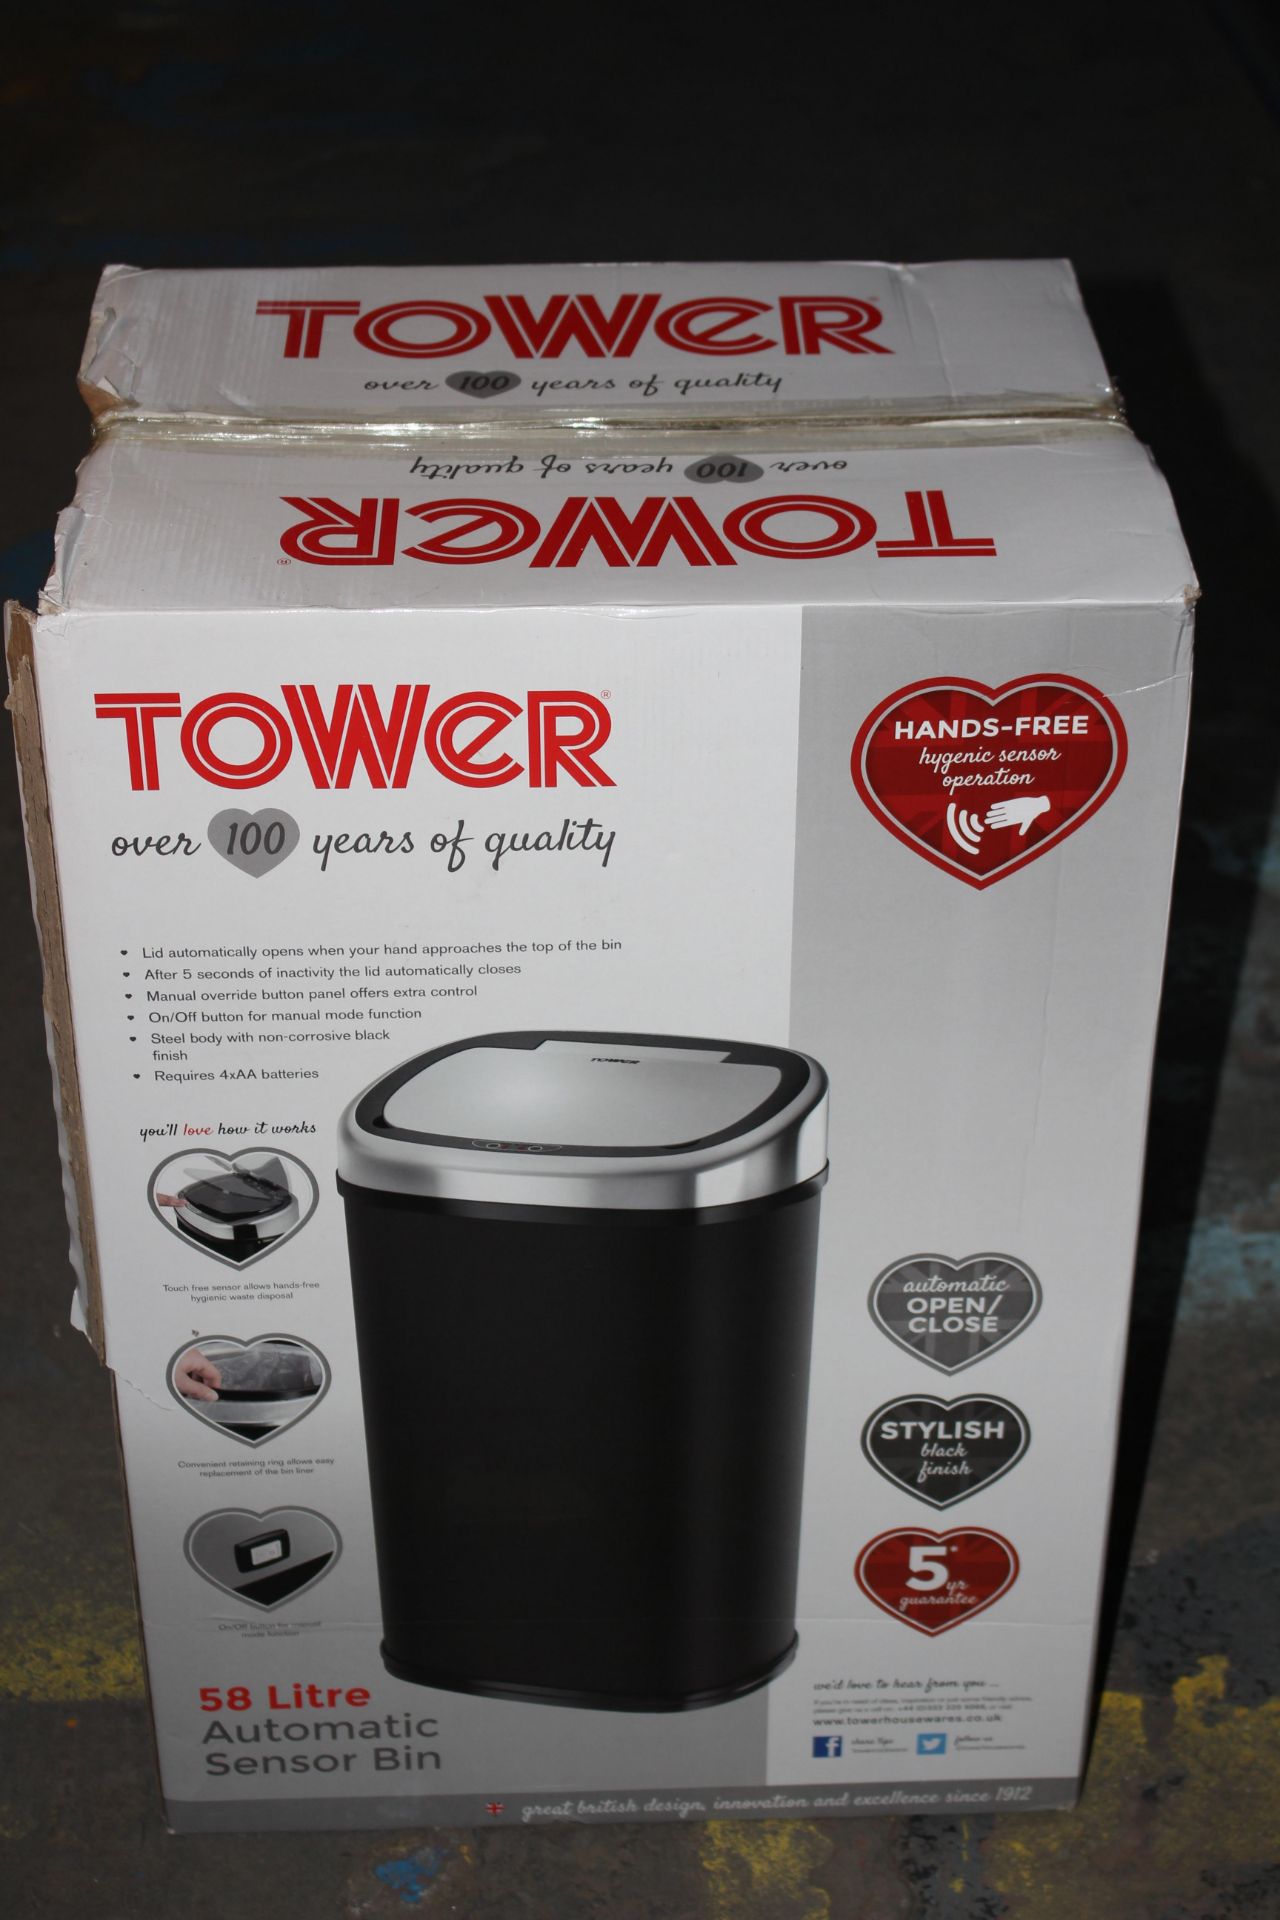 BOXED TOWER 58LITRE AUTOMATIC SENSOR BIN RRP £58.00Condition ReportAppraisal Available on Request-